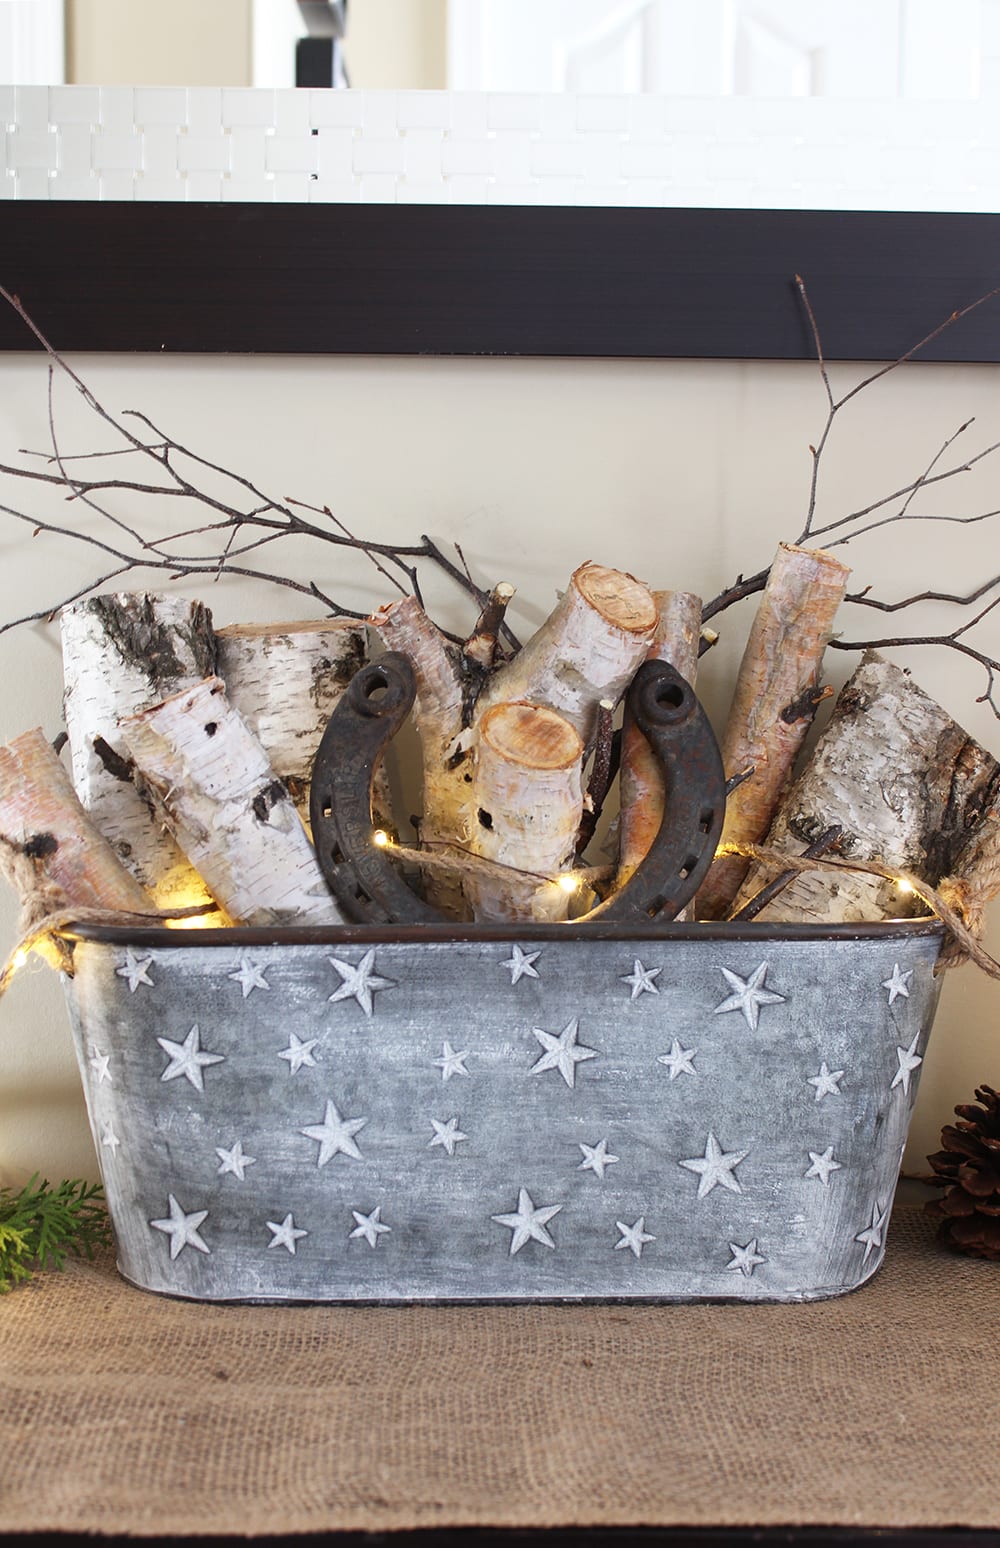 Nature inspired holiday decor featuring birch logs and twigs in a galvanized steel bucket, plus a horseshoe for good luck.